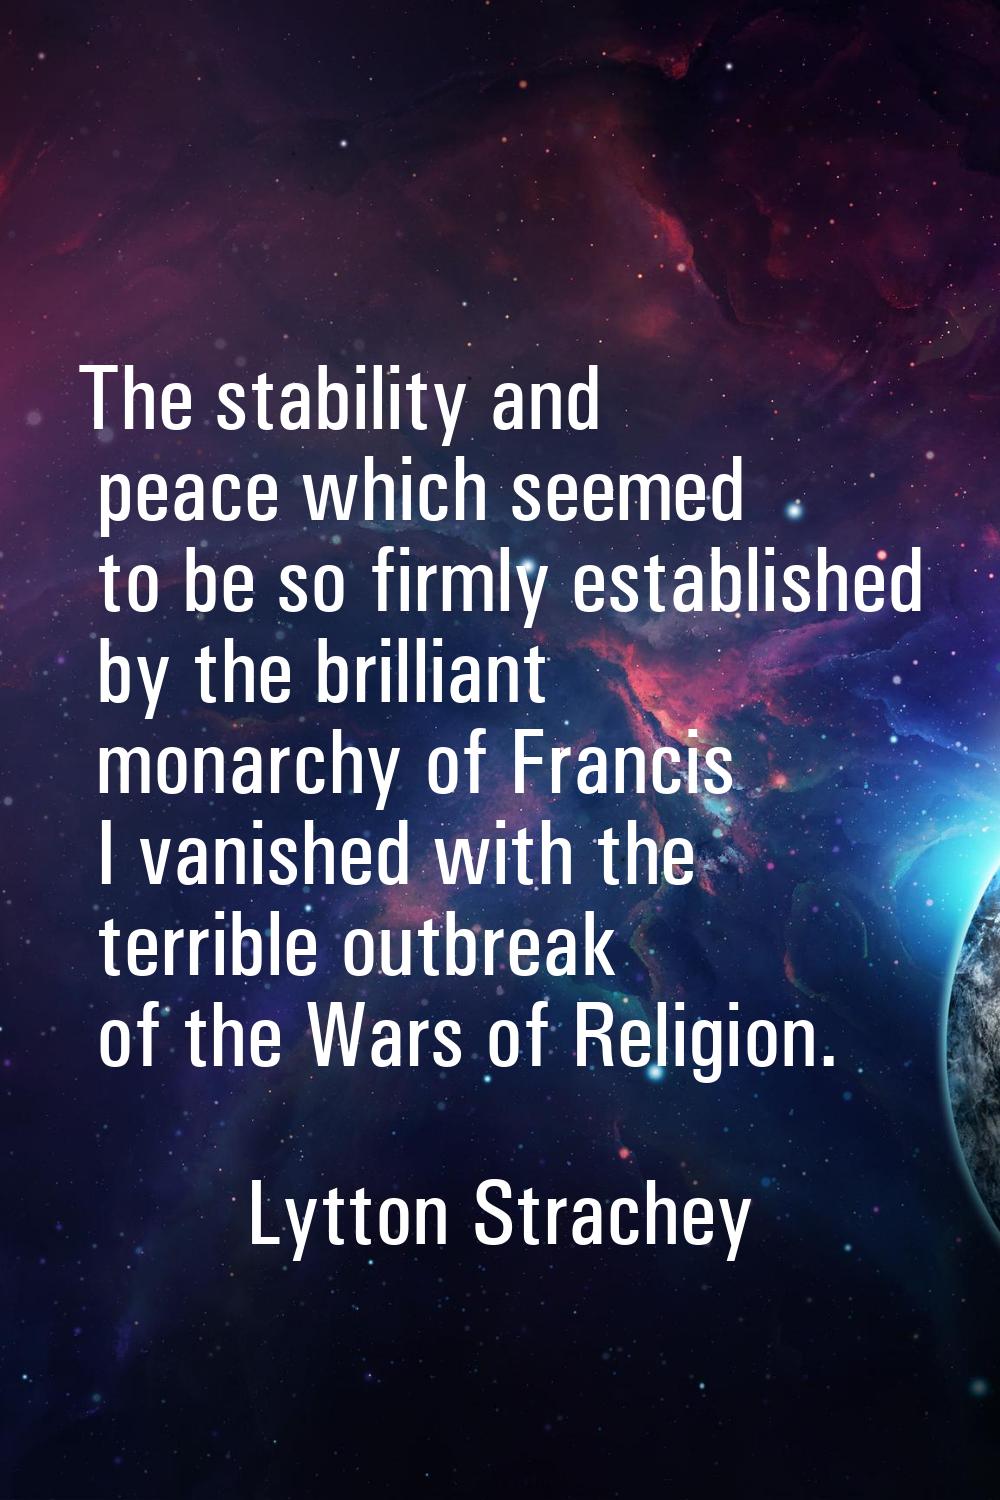 The stability and peace which seemed to be so firmly established by the brilliant monarchy of Franc